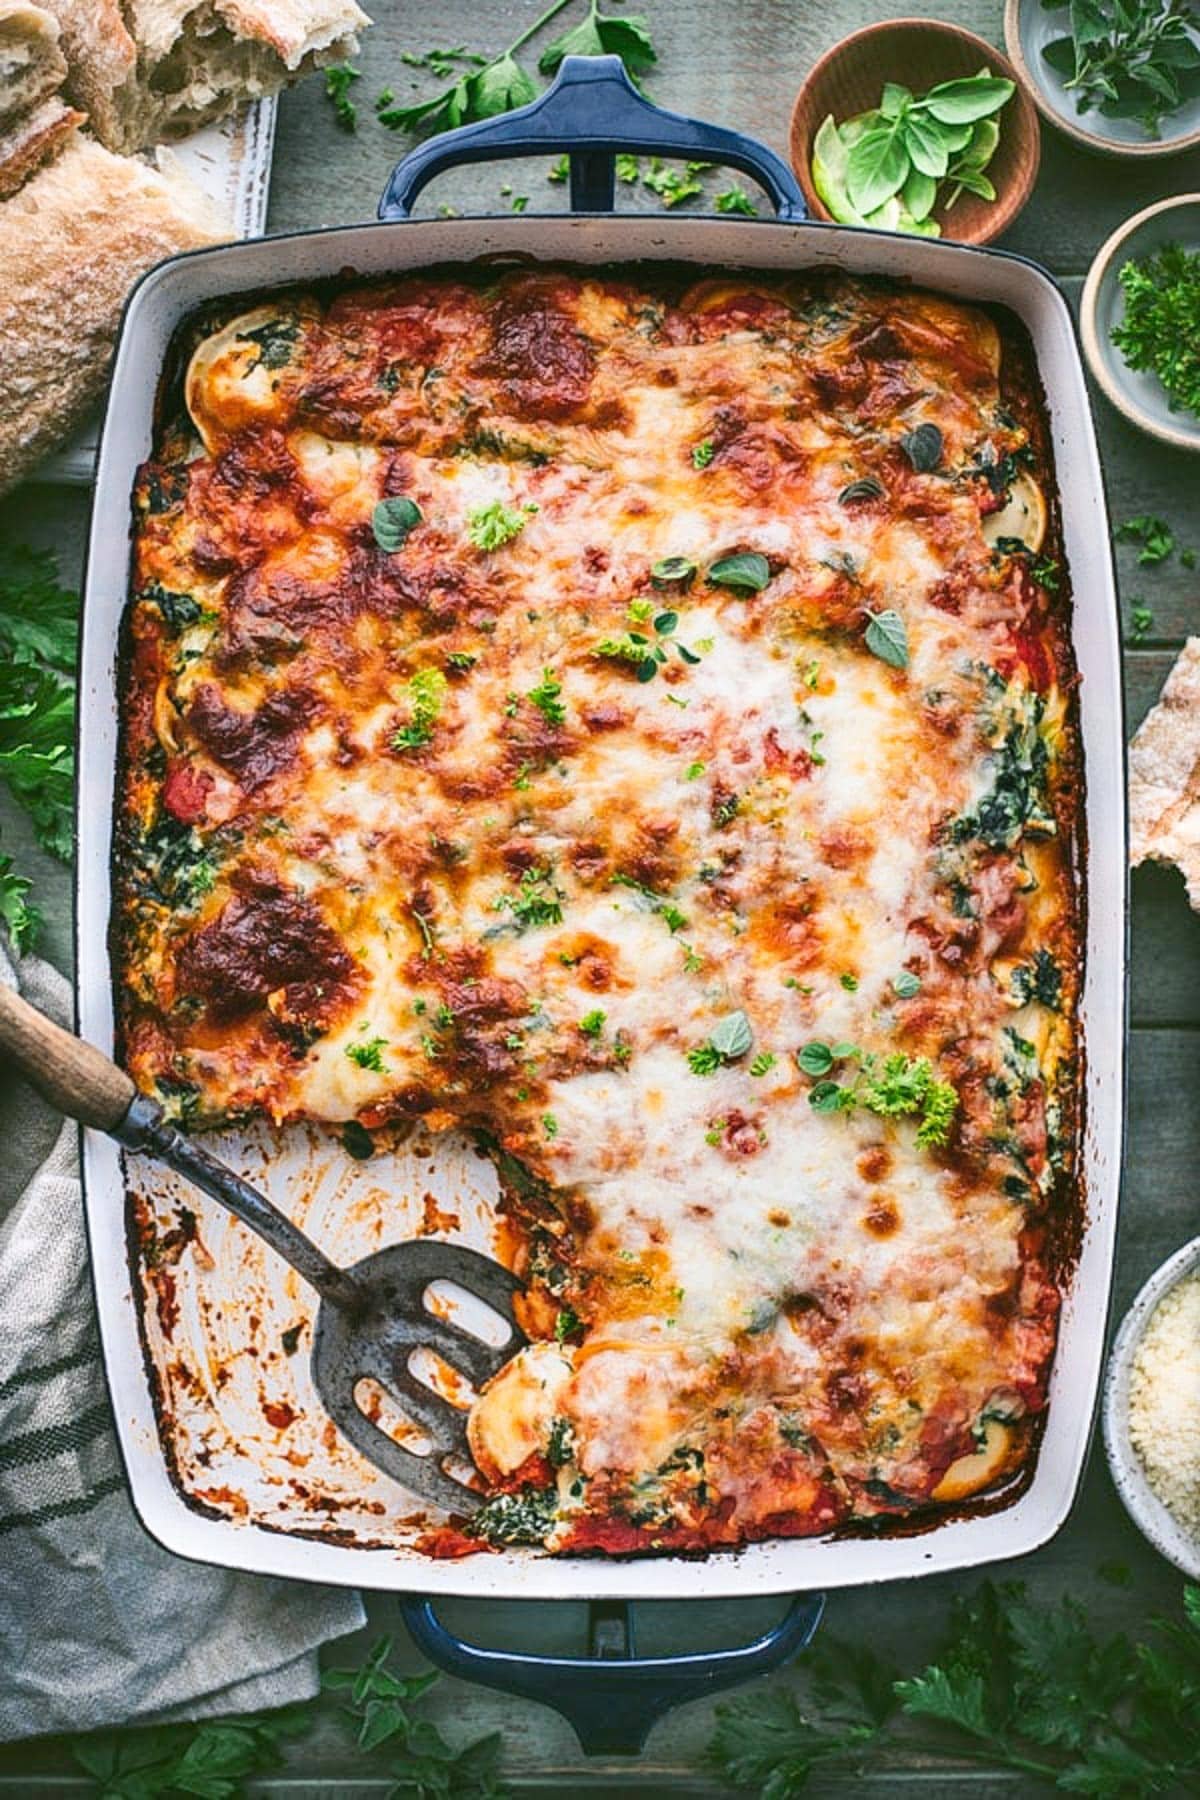 Serving spoon in a dish of baked ravioli with ricotta and spinach.